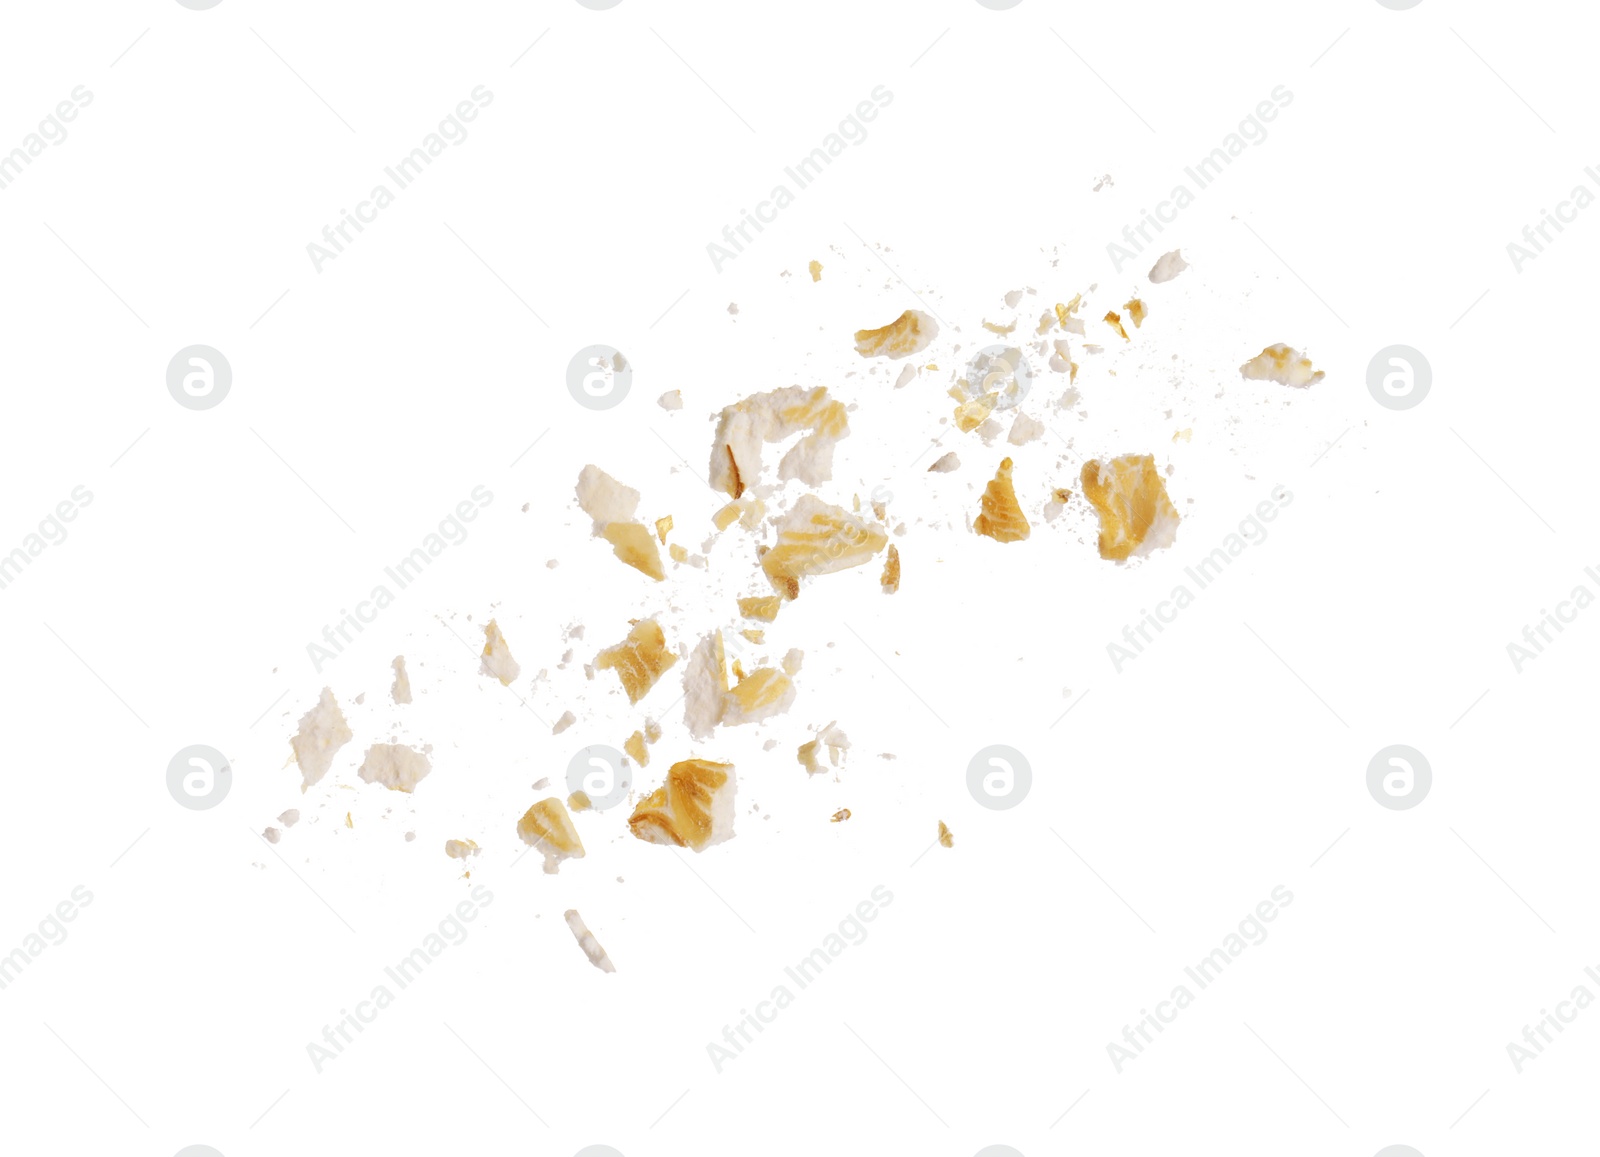 Photo of Shredded dry rolled oats isolated on white